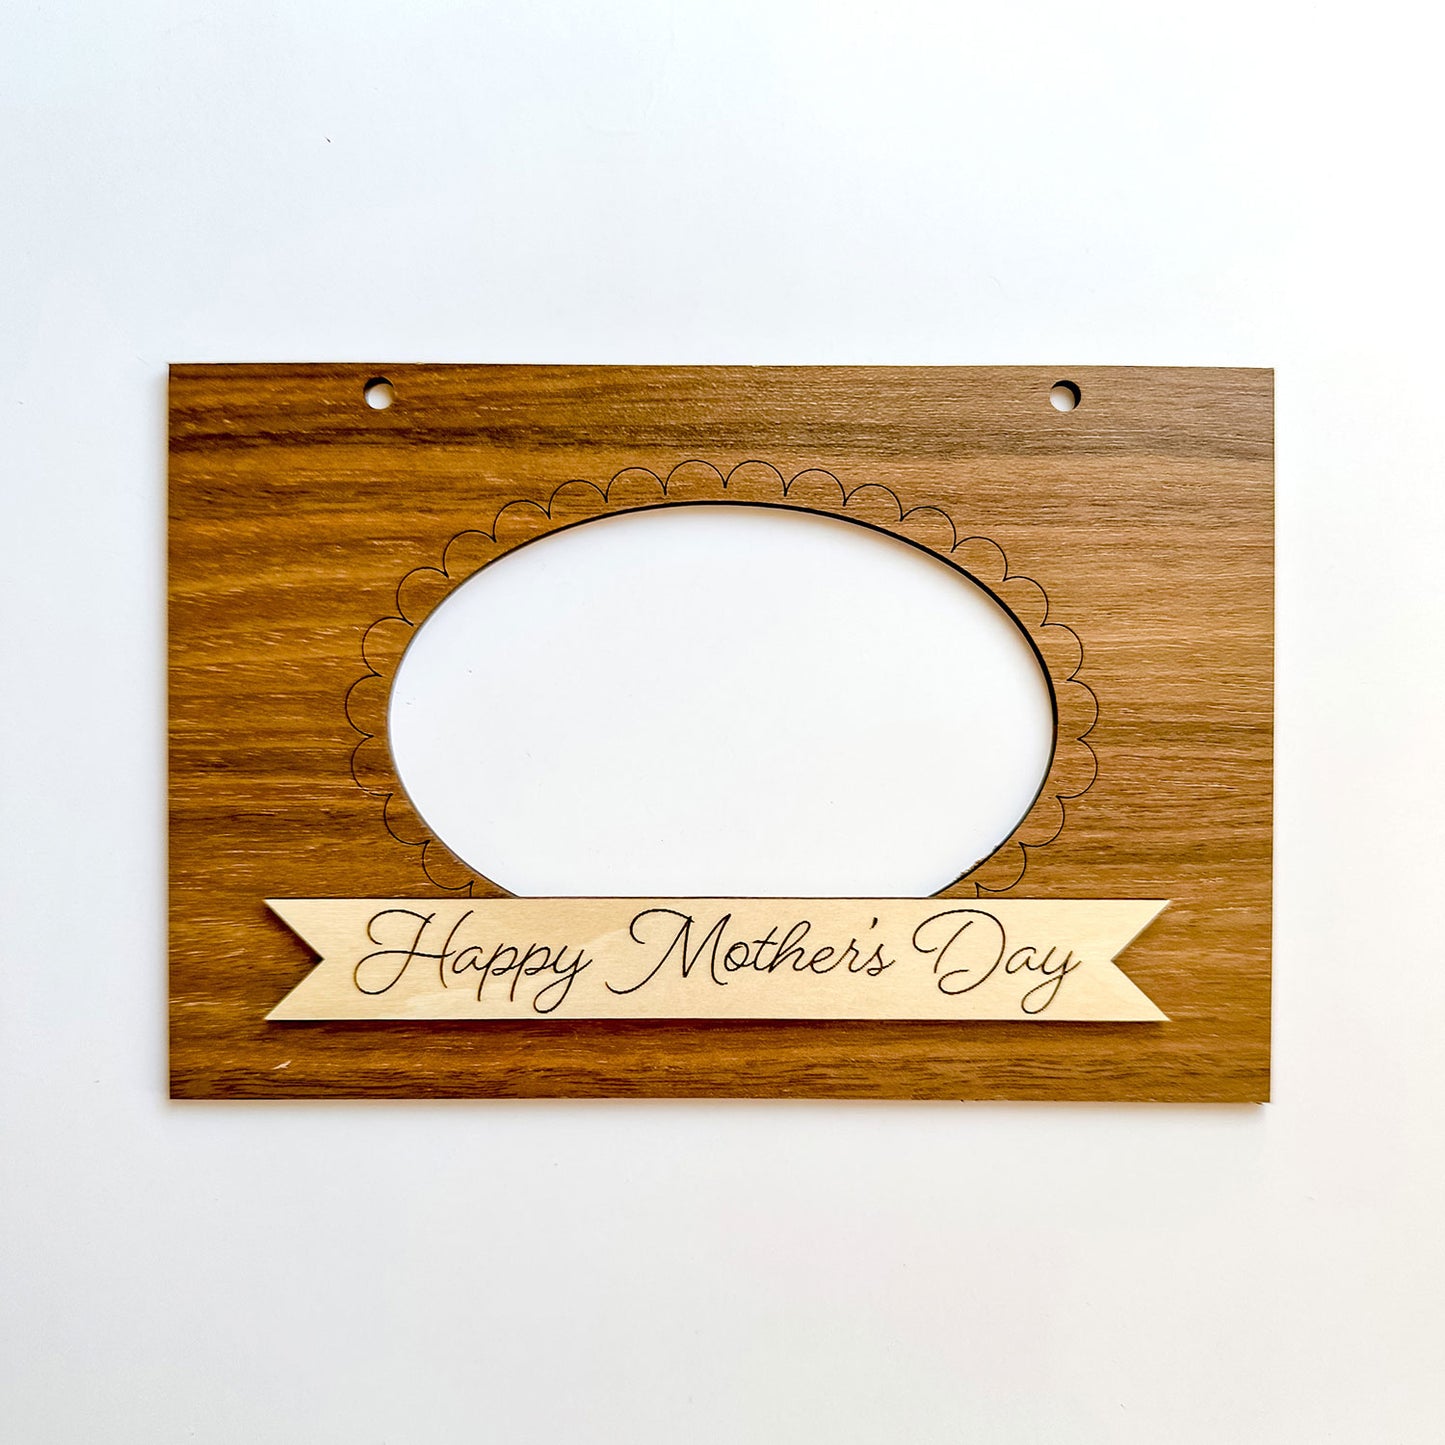 Oval-Framed Photo Album Cover - Happy Mother's Day Gift